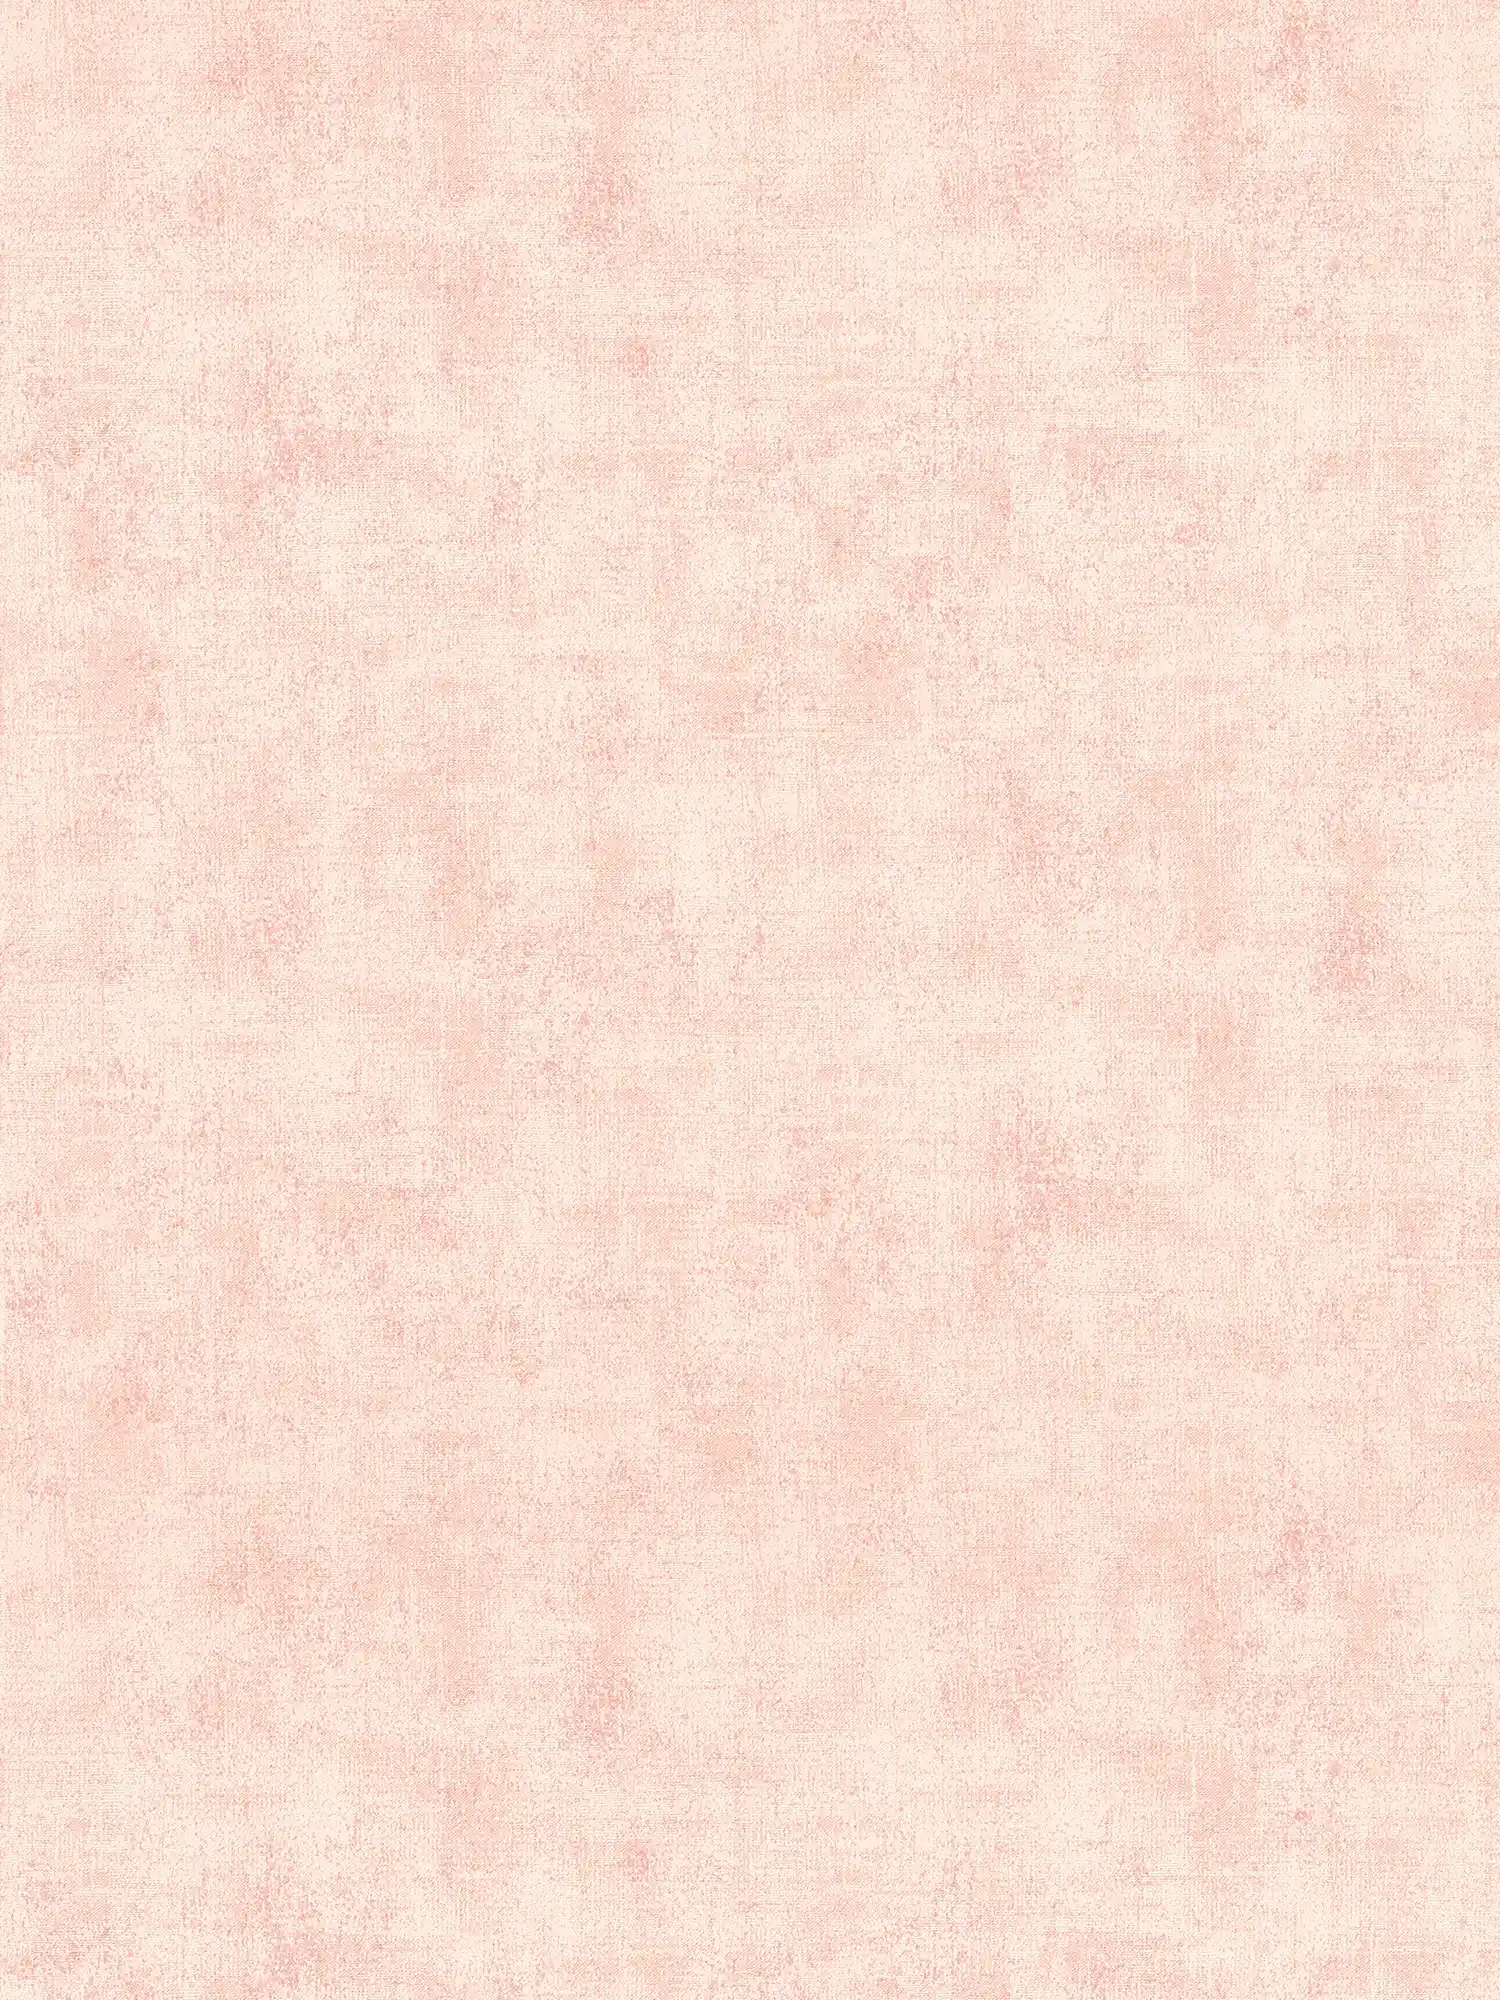 Plain wallpaper with discreet structure look - pink
